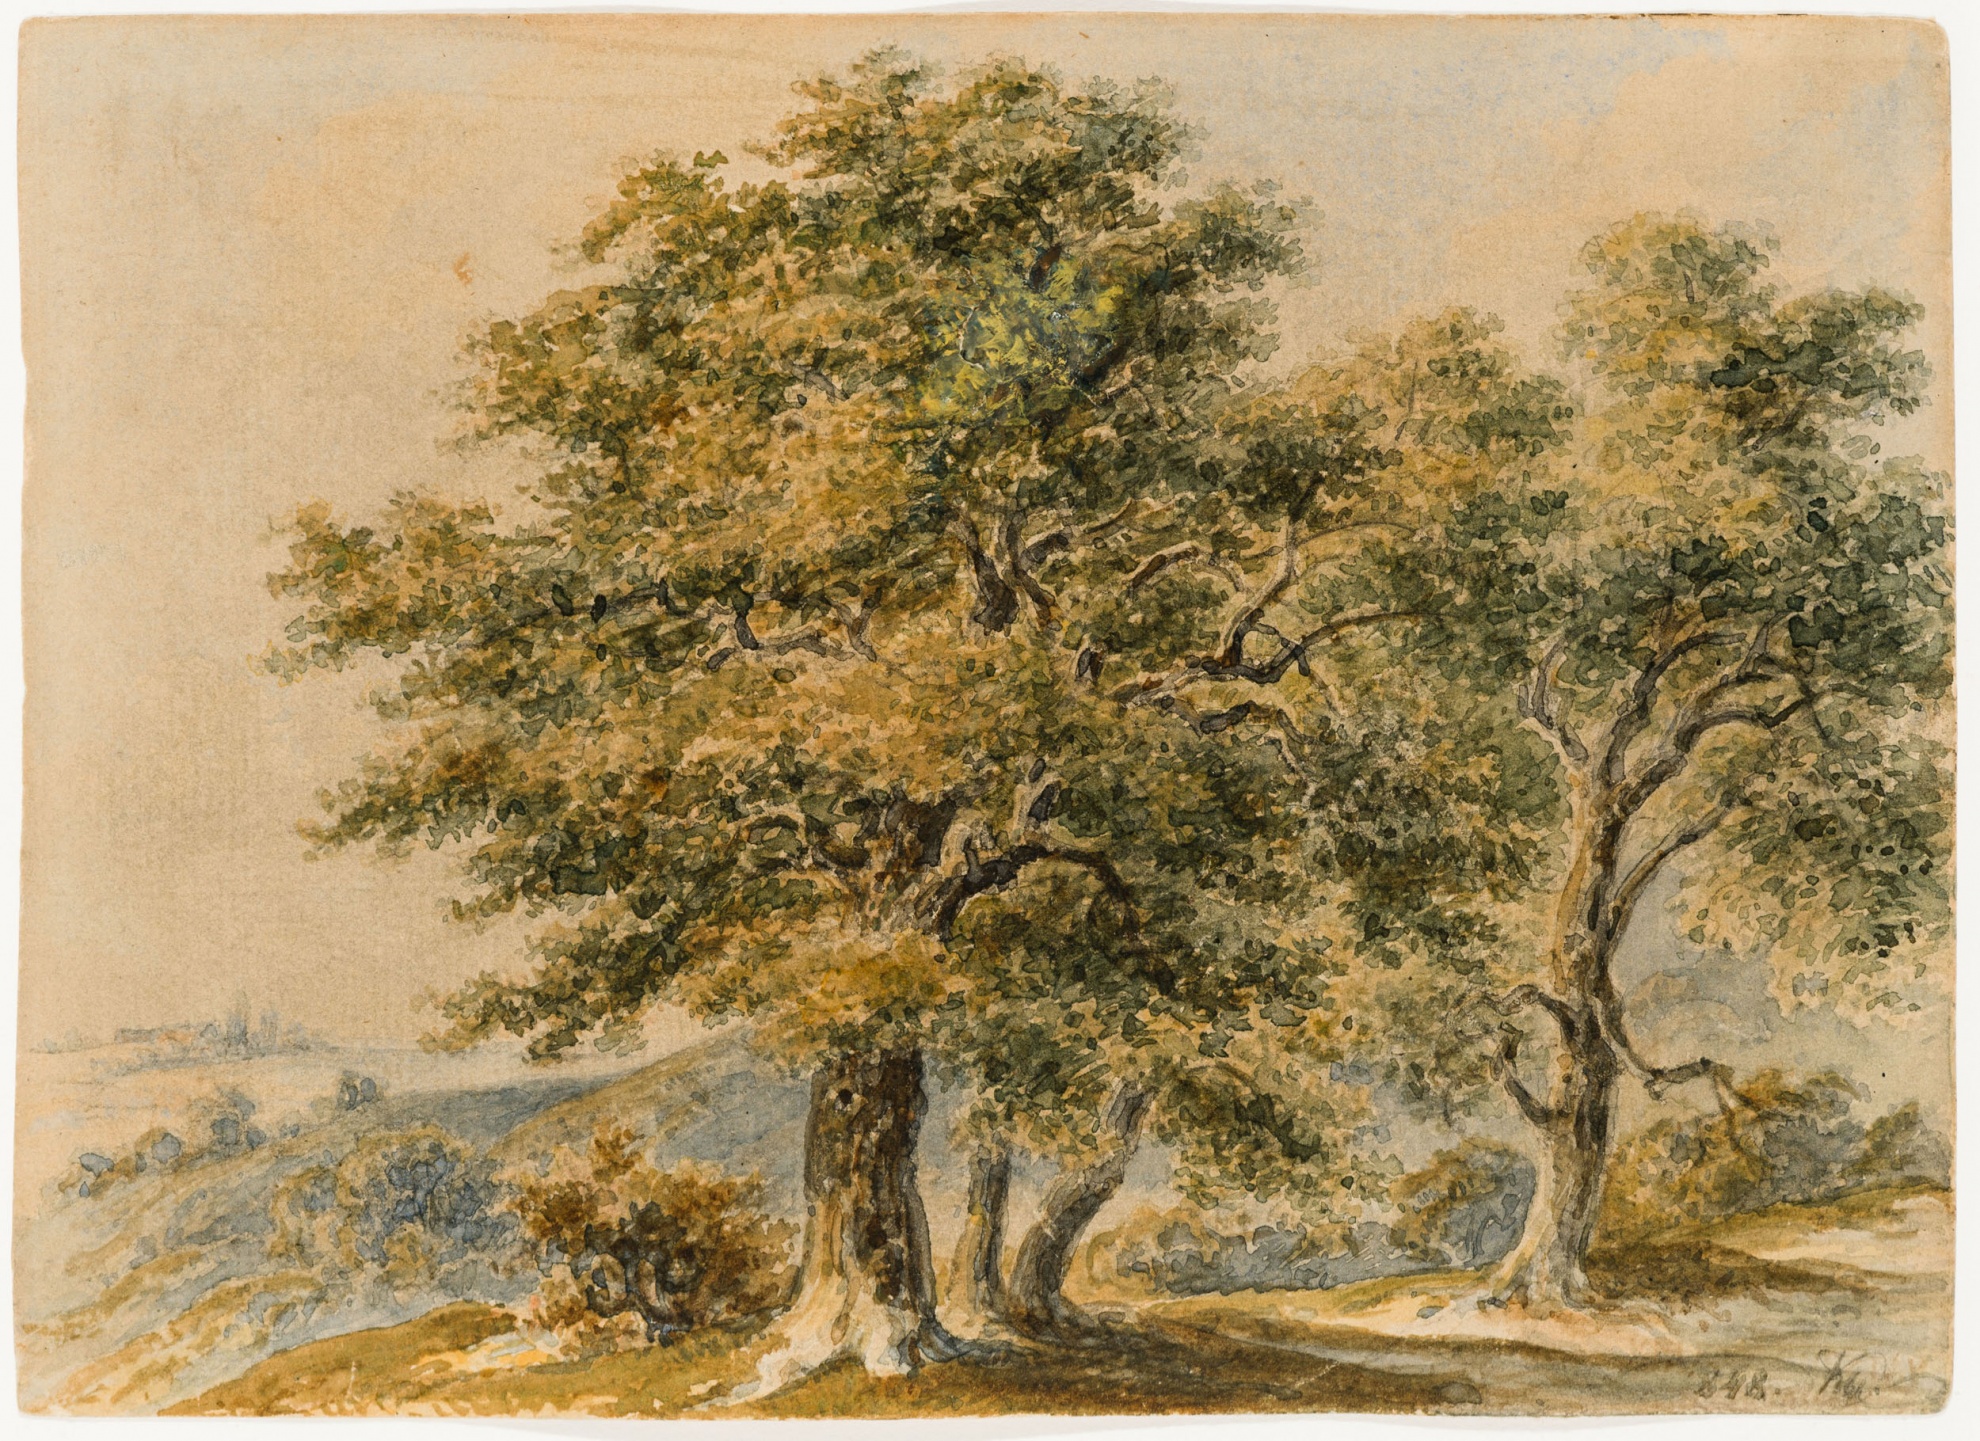 untitled (view of oak trees), (known as “Old Oak Trees”)

(The Salgo Trust for Education CC BY-NC-SA)